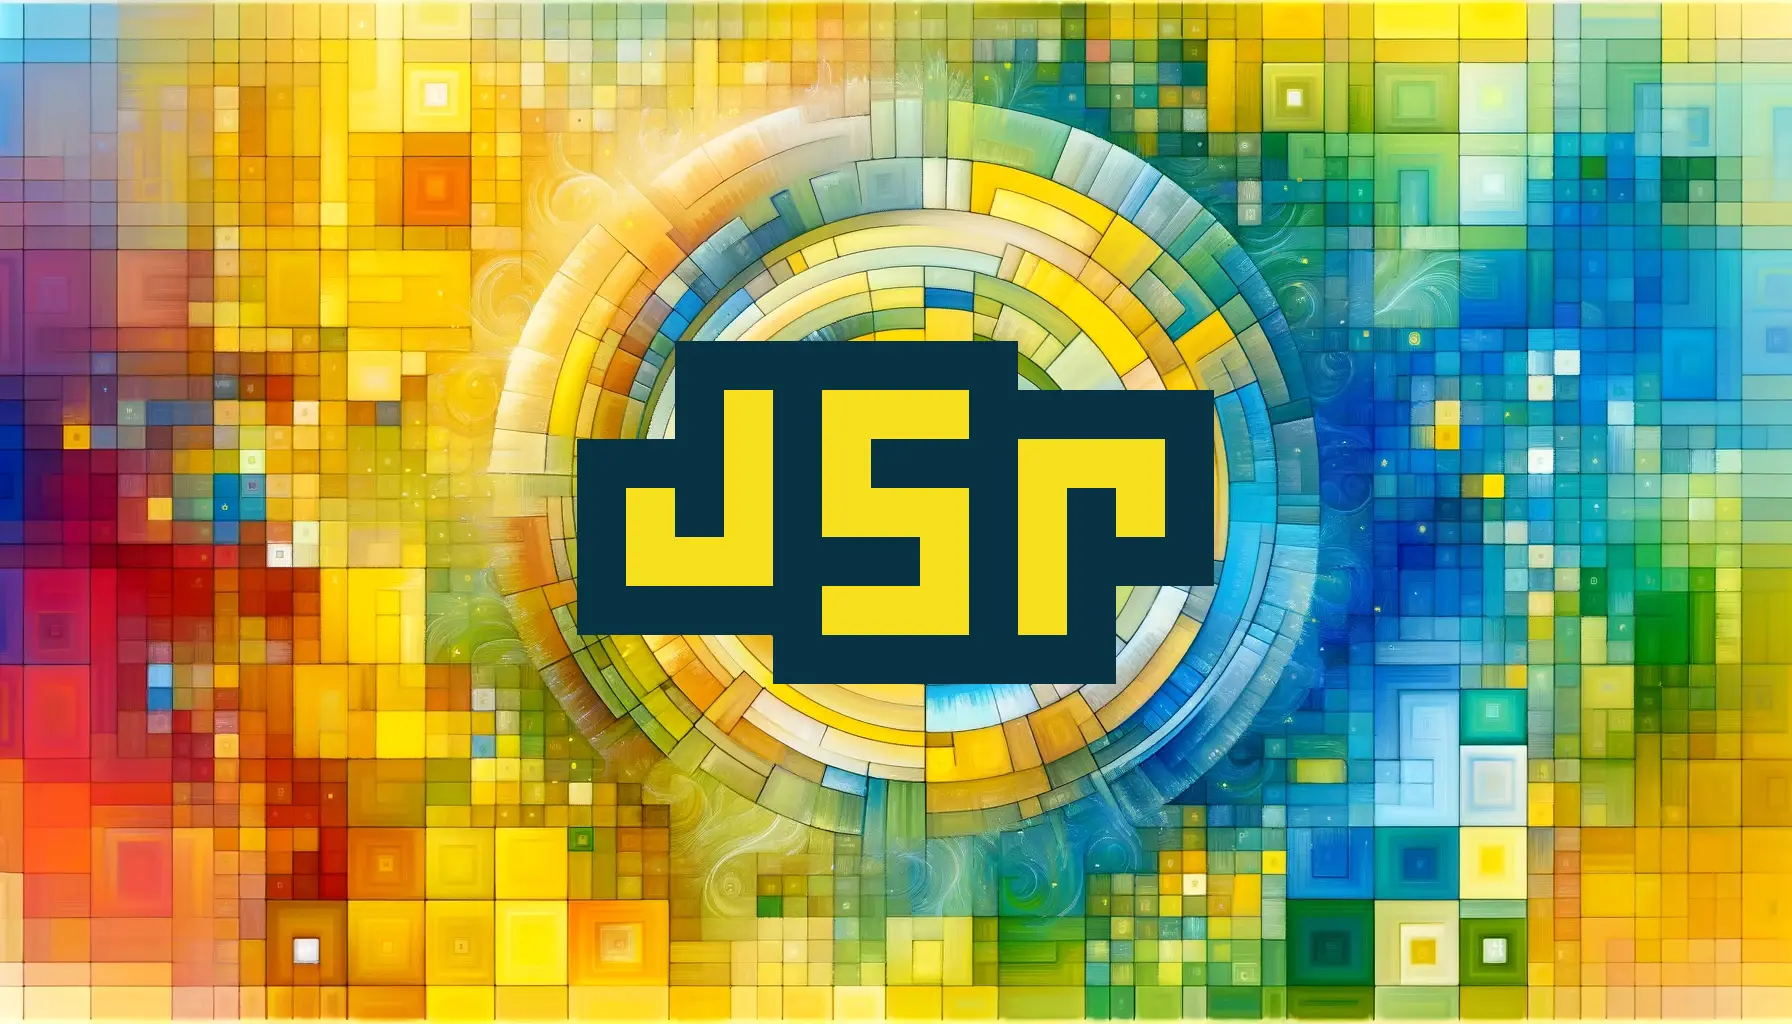 The JSR logo on an abstract square background